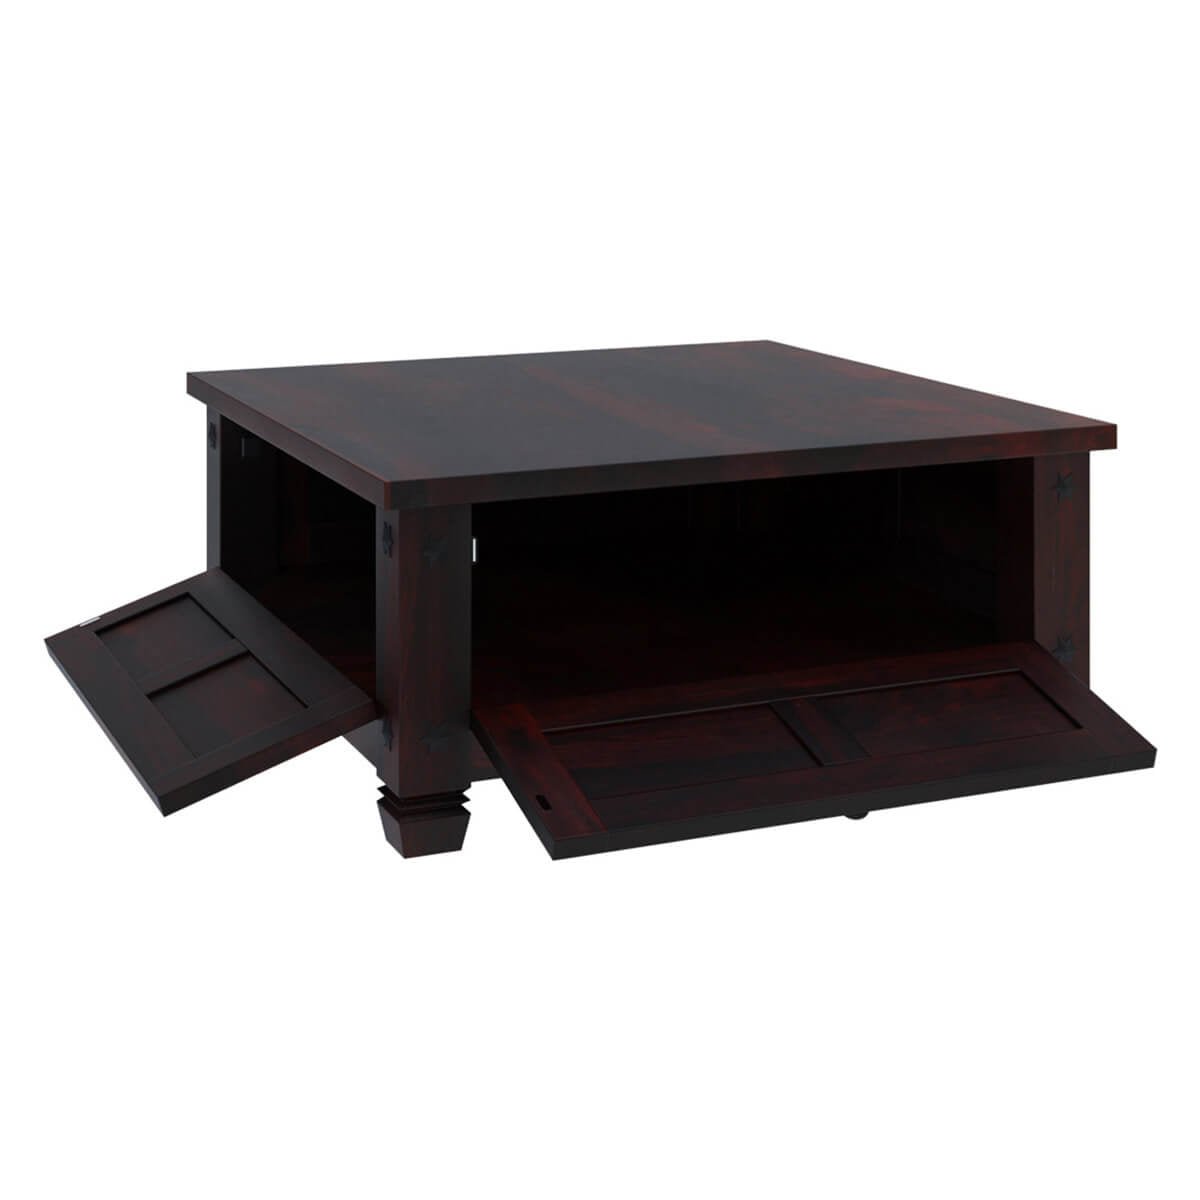 Russet Solid Wood 4 Doors Square Rustic Coffee Table With Storage